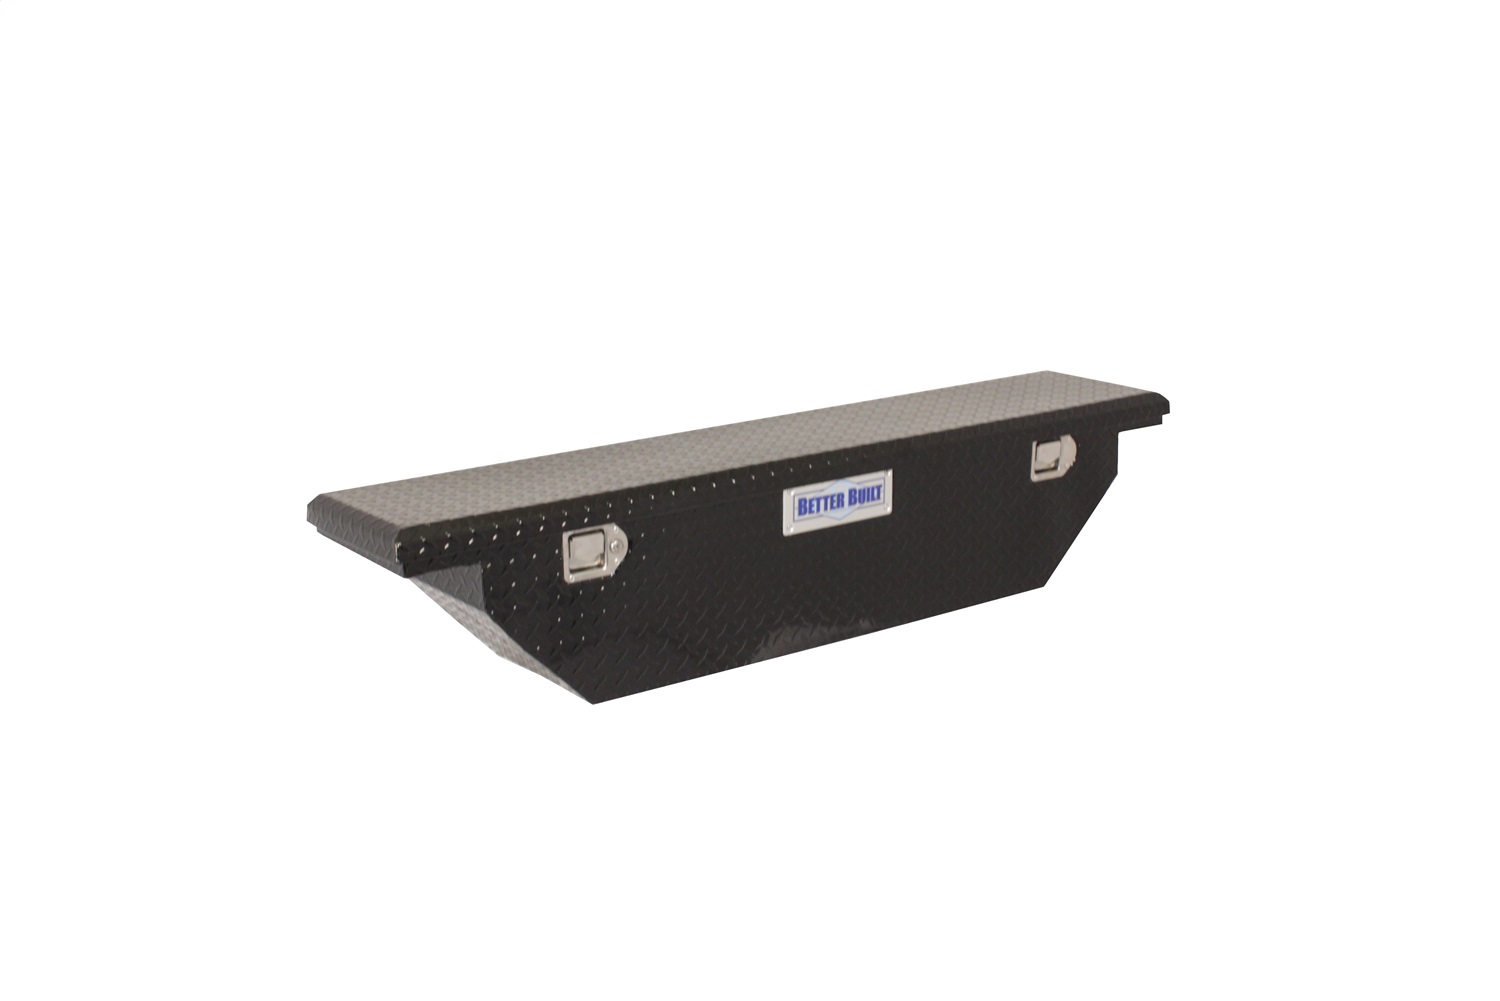 Better Built 73210285 Narrow Low Profile Crossover Classic Wedge 61.5" Tool Box